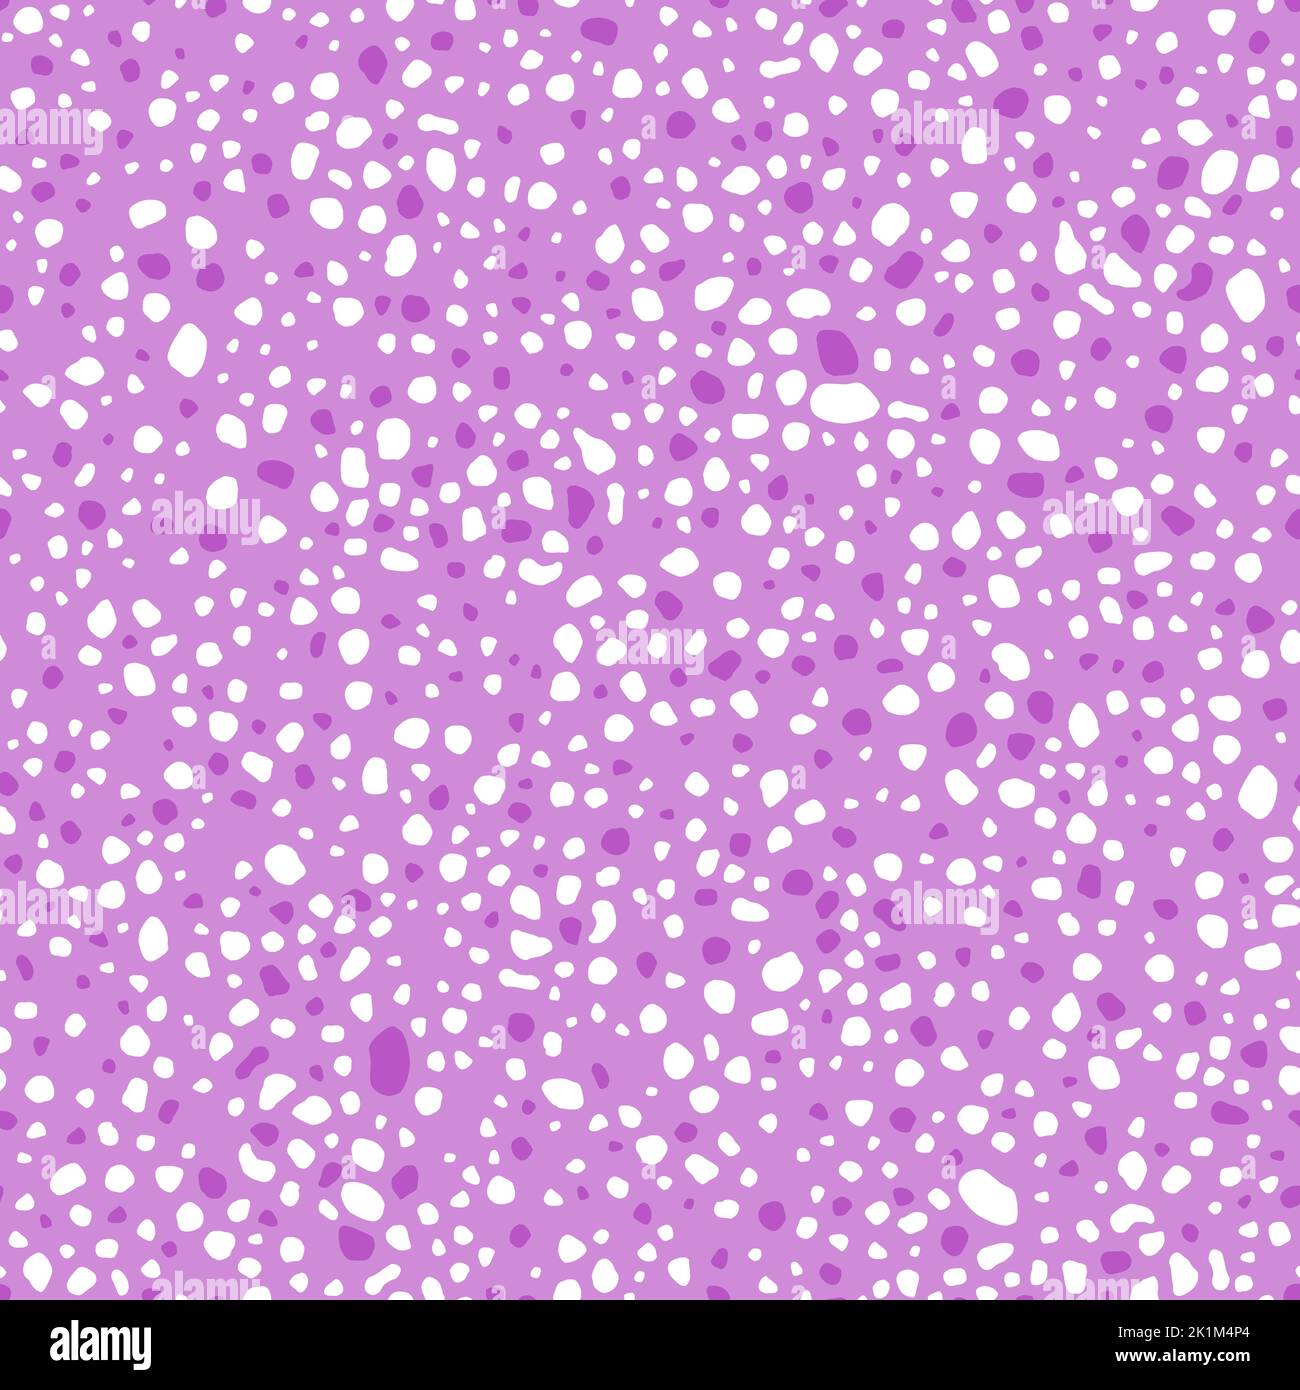 Irregular spots fashion print. Chaotic dots and blobs seamless fashion texture vector illustration purple and white. Stock Vector